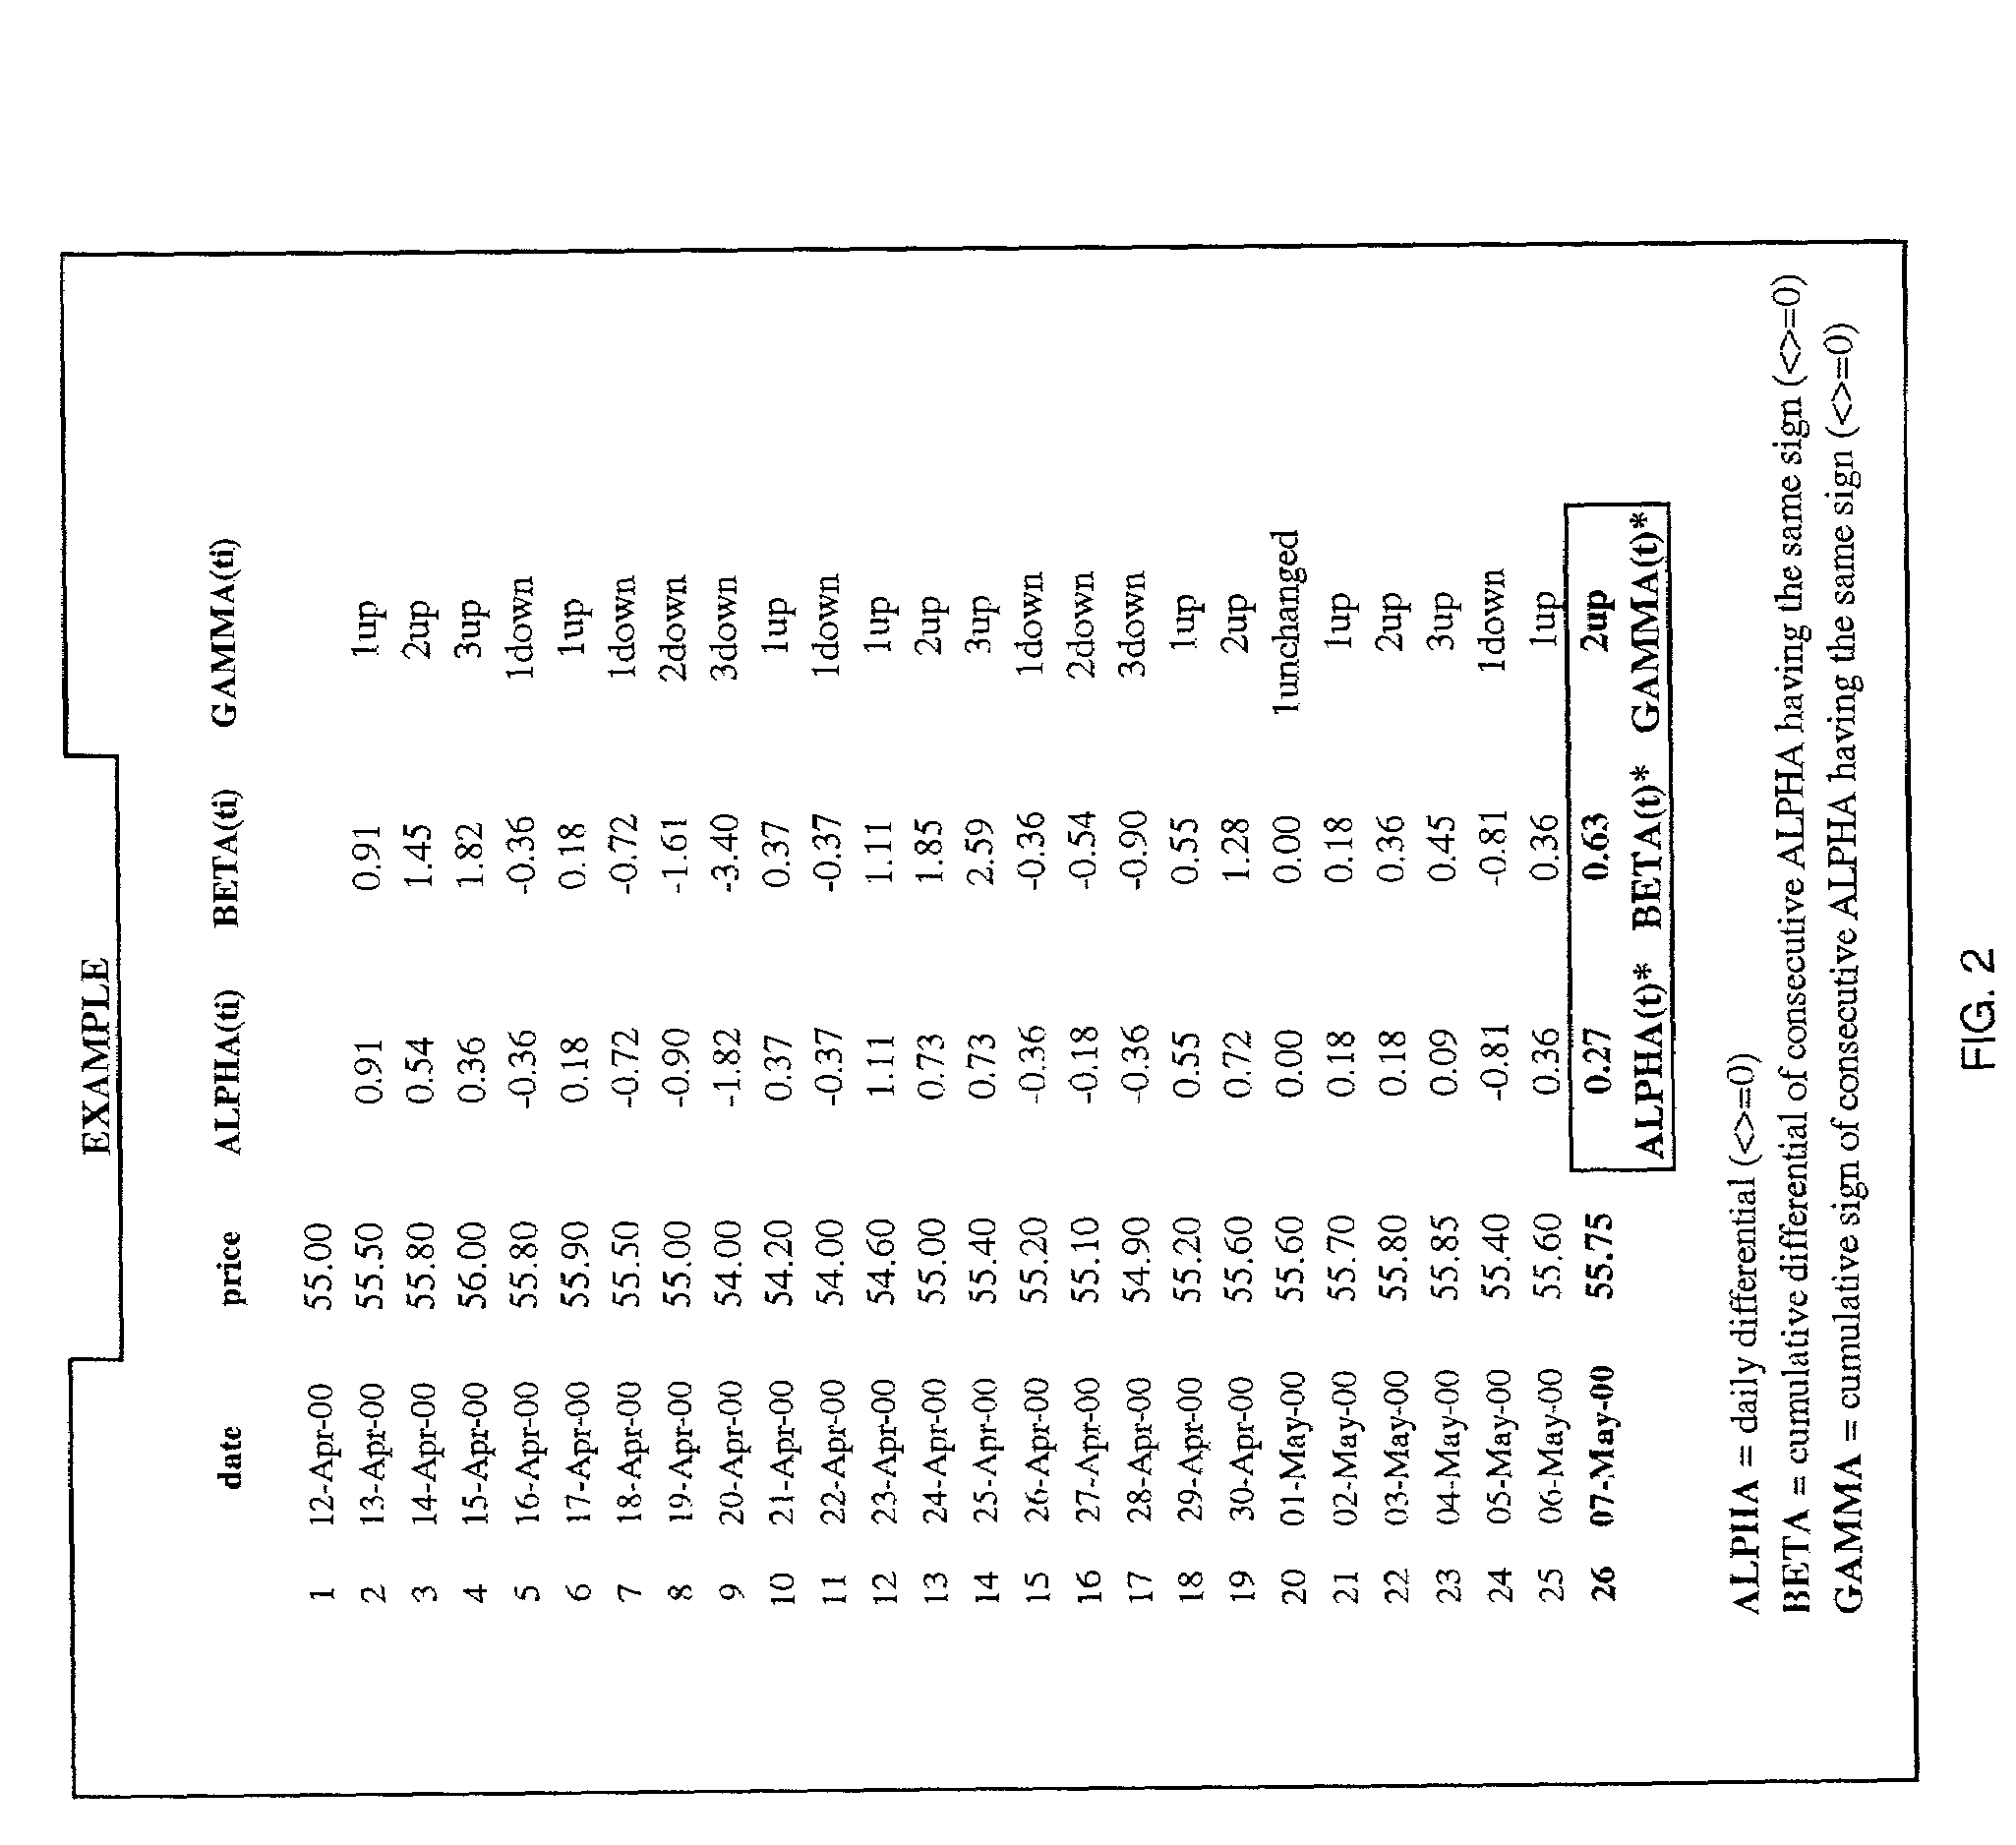 Method for predictive determination of financial investment performance